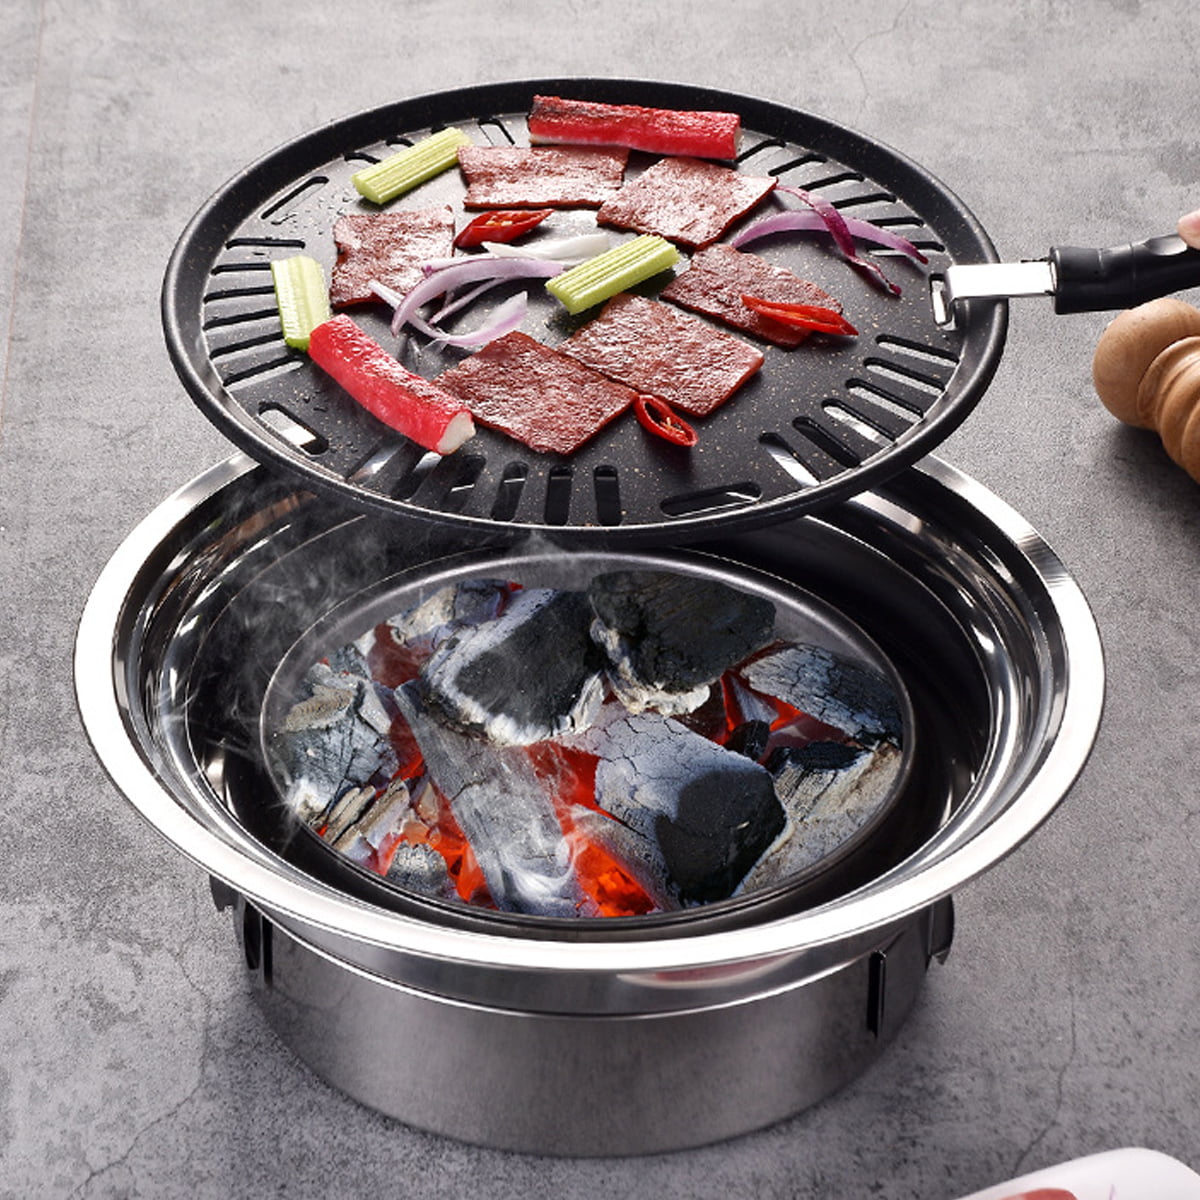 10 Big K Disposable Instant Light BBQ Charcoal Grill Home Outdoor Picnic Camping 